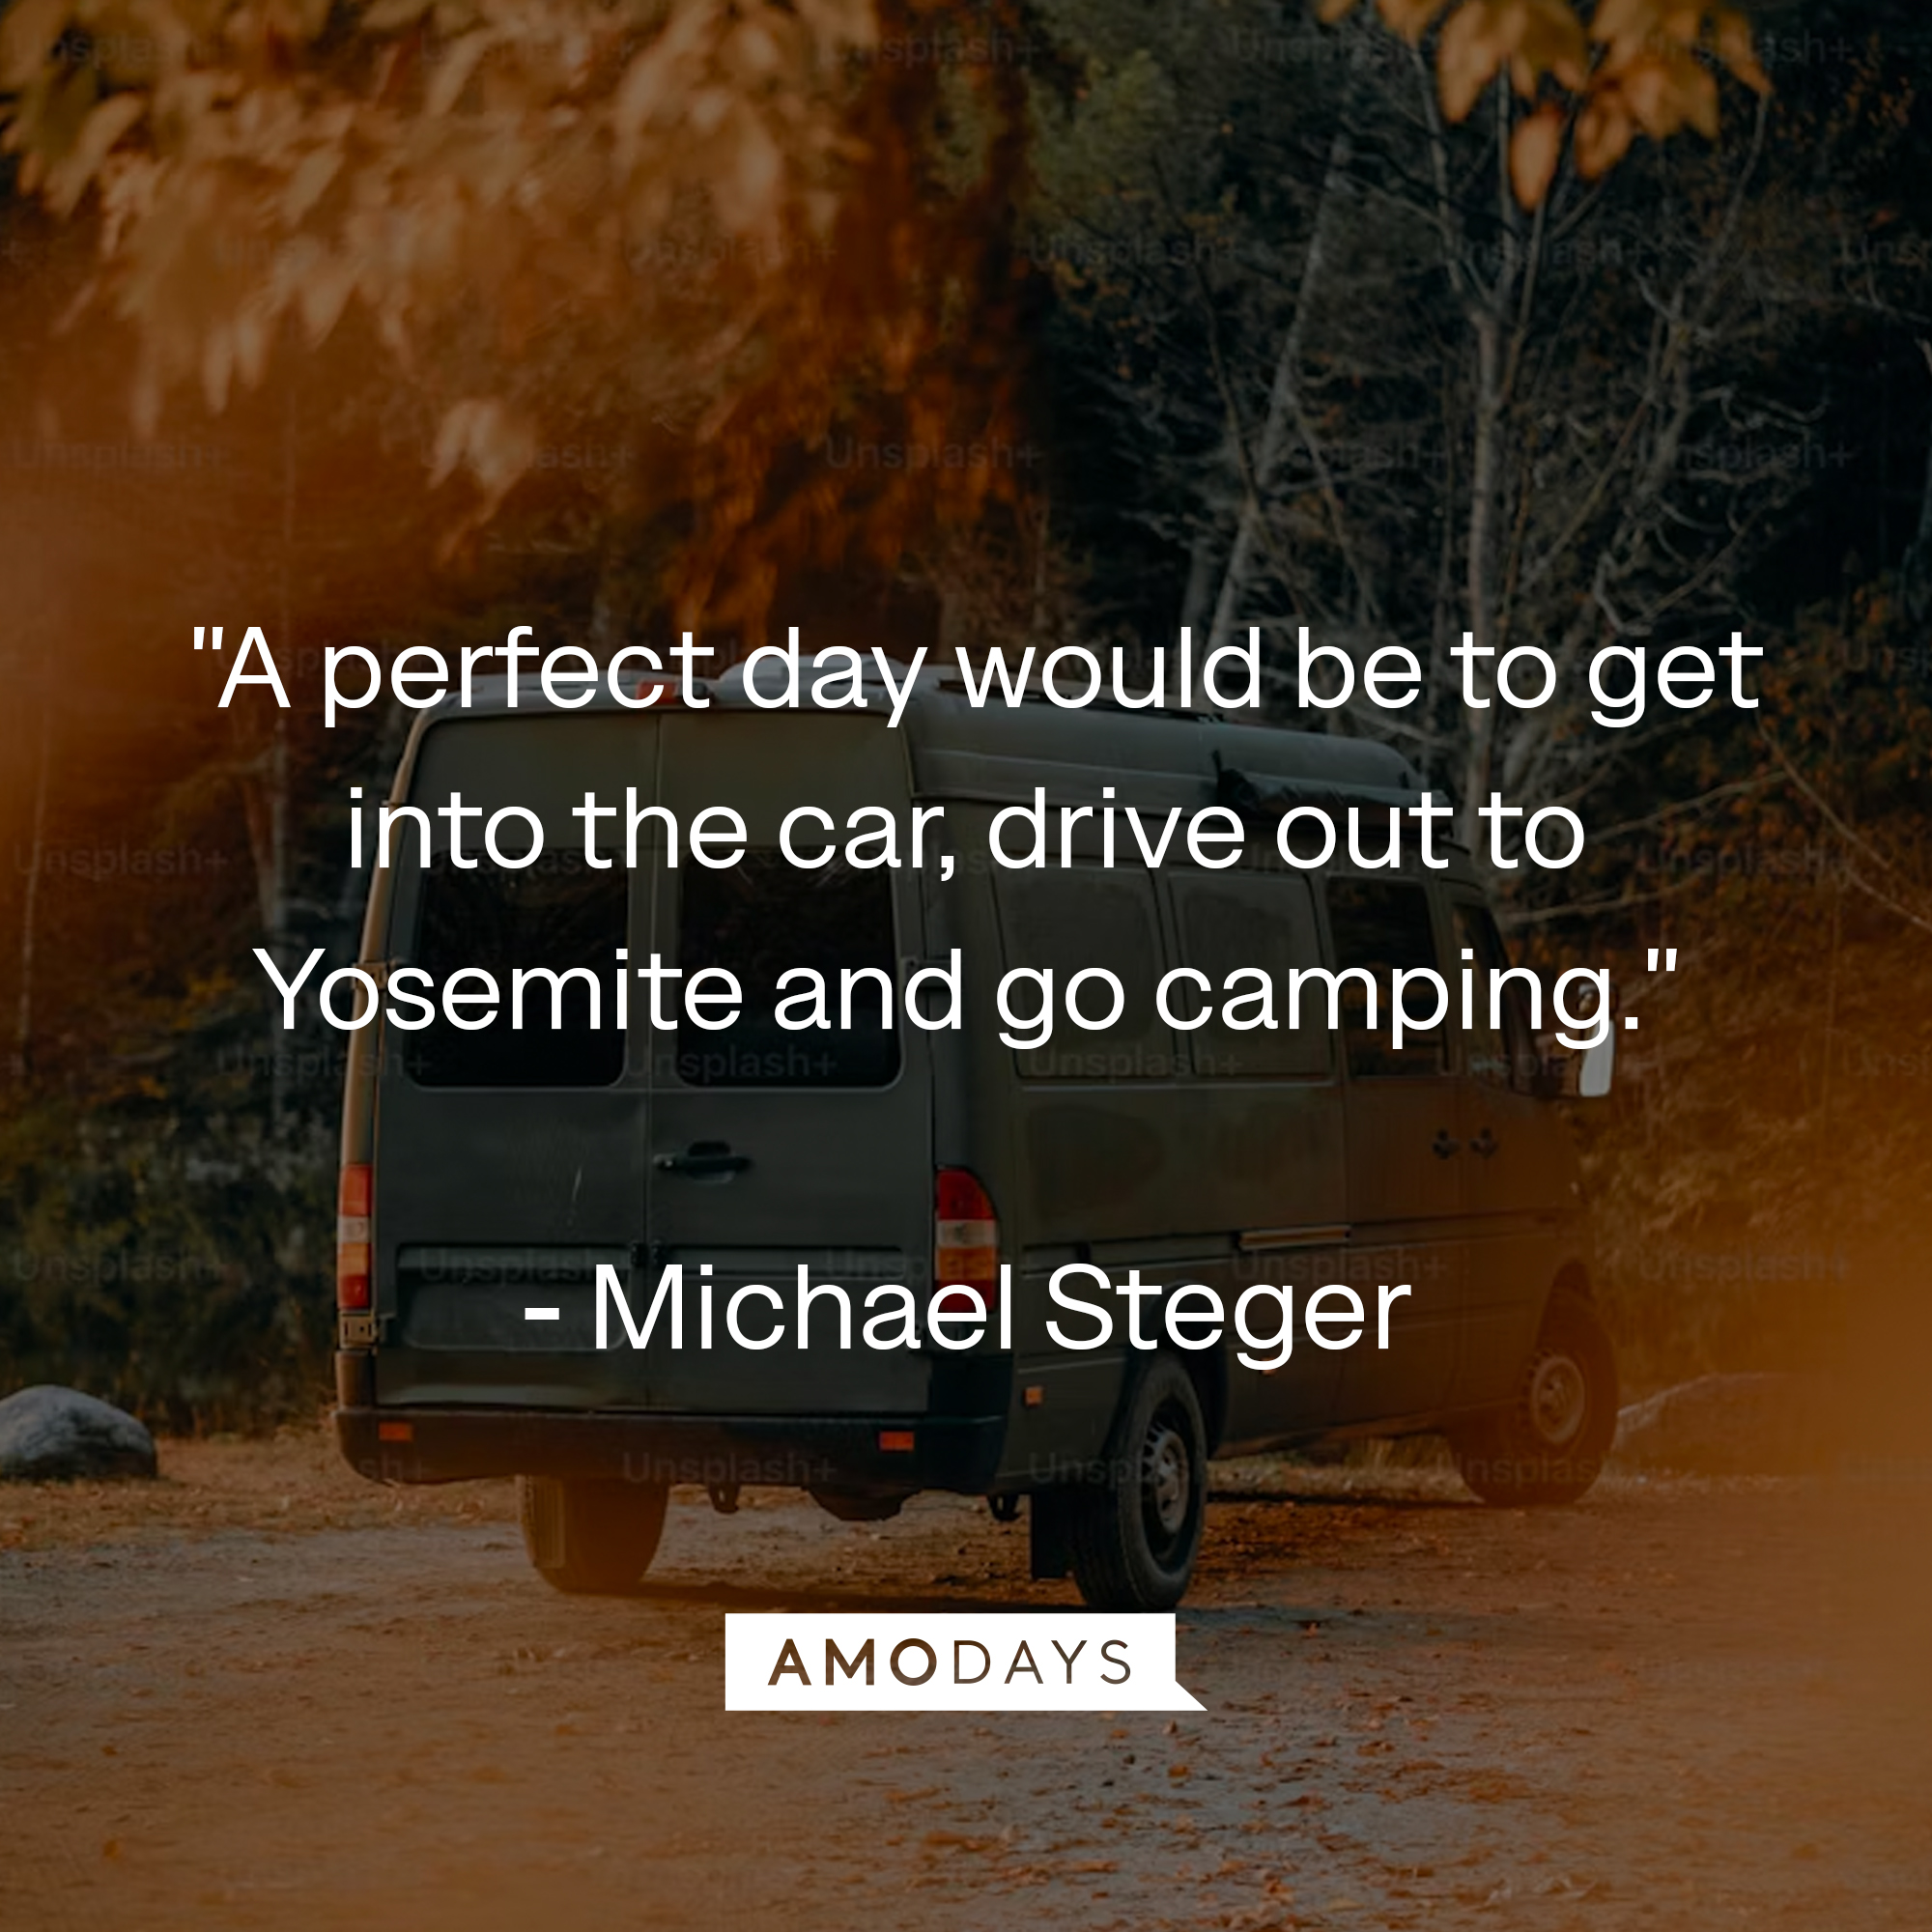 Michael Steger's quote: "A perfect day would be to get into the car, drive out to Yosemite and go camping." Source: Countryliving